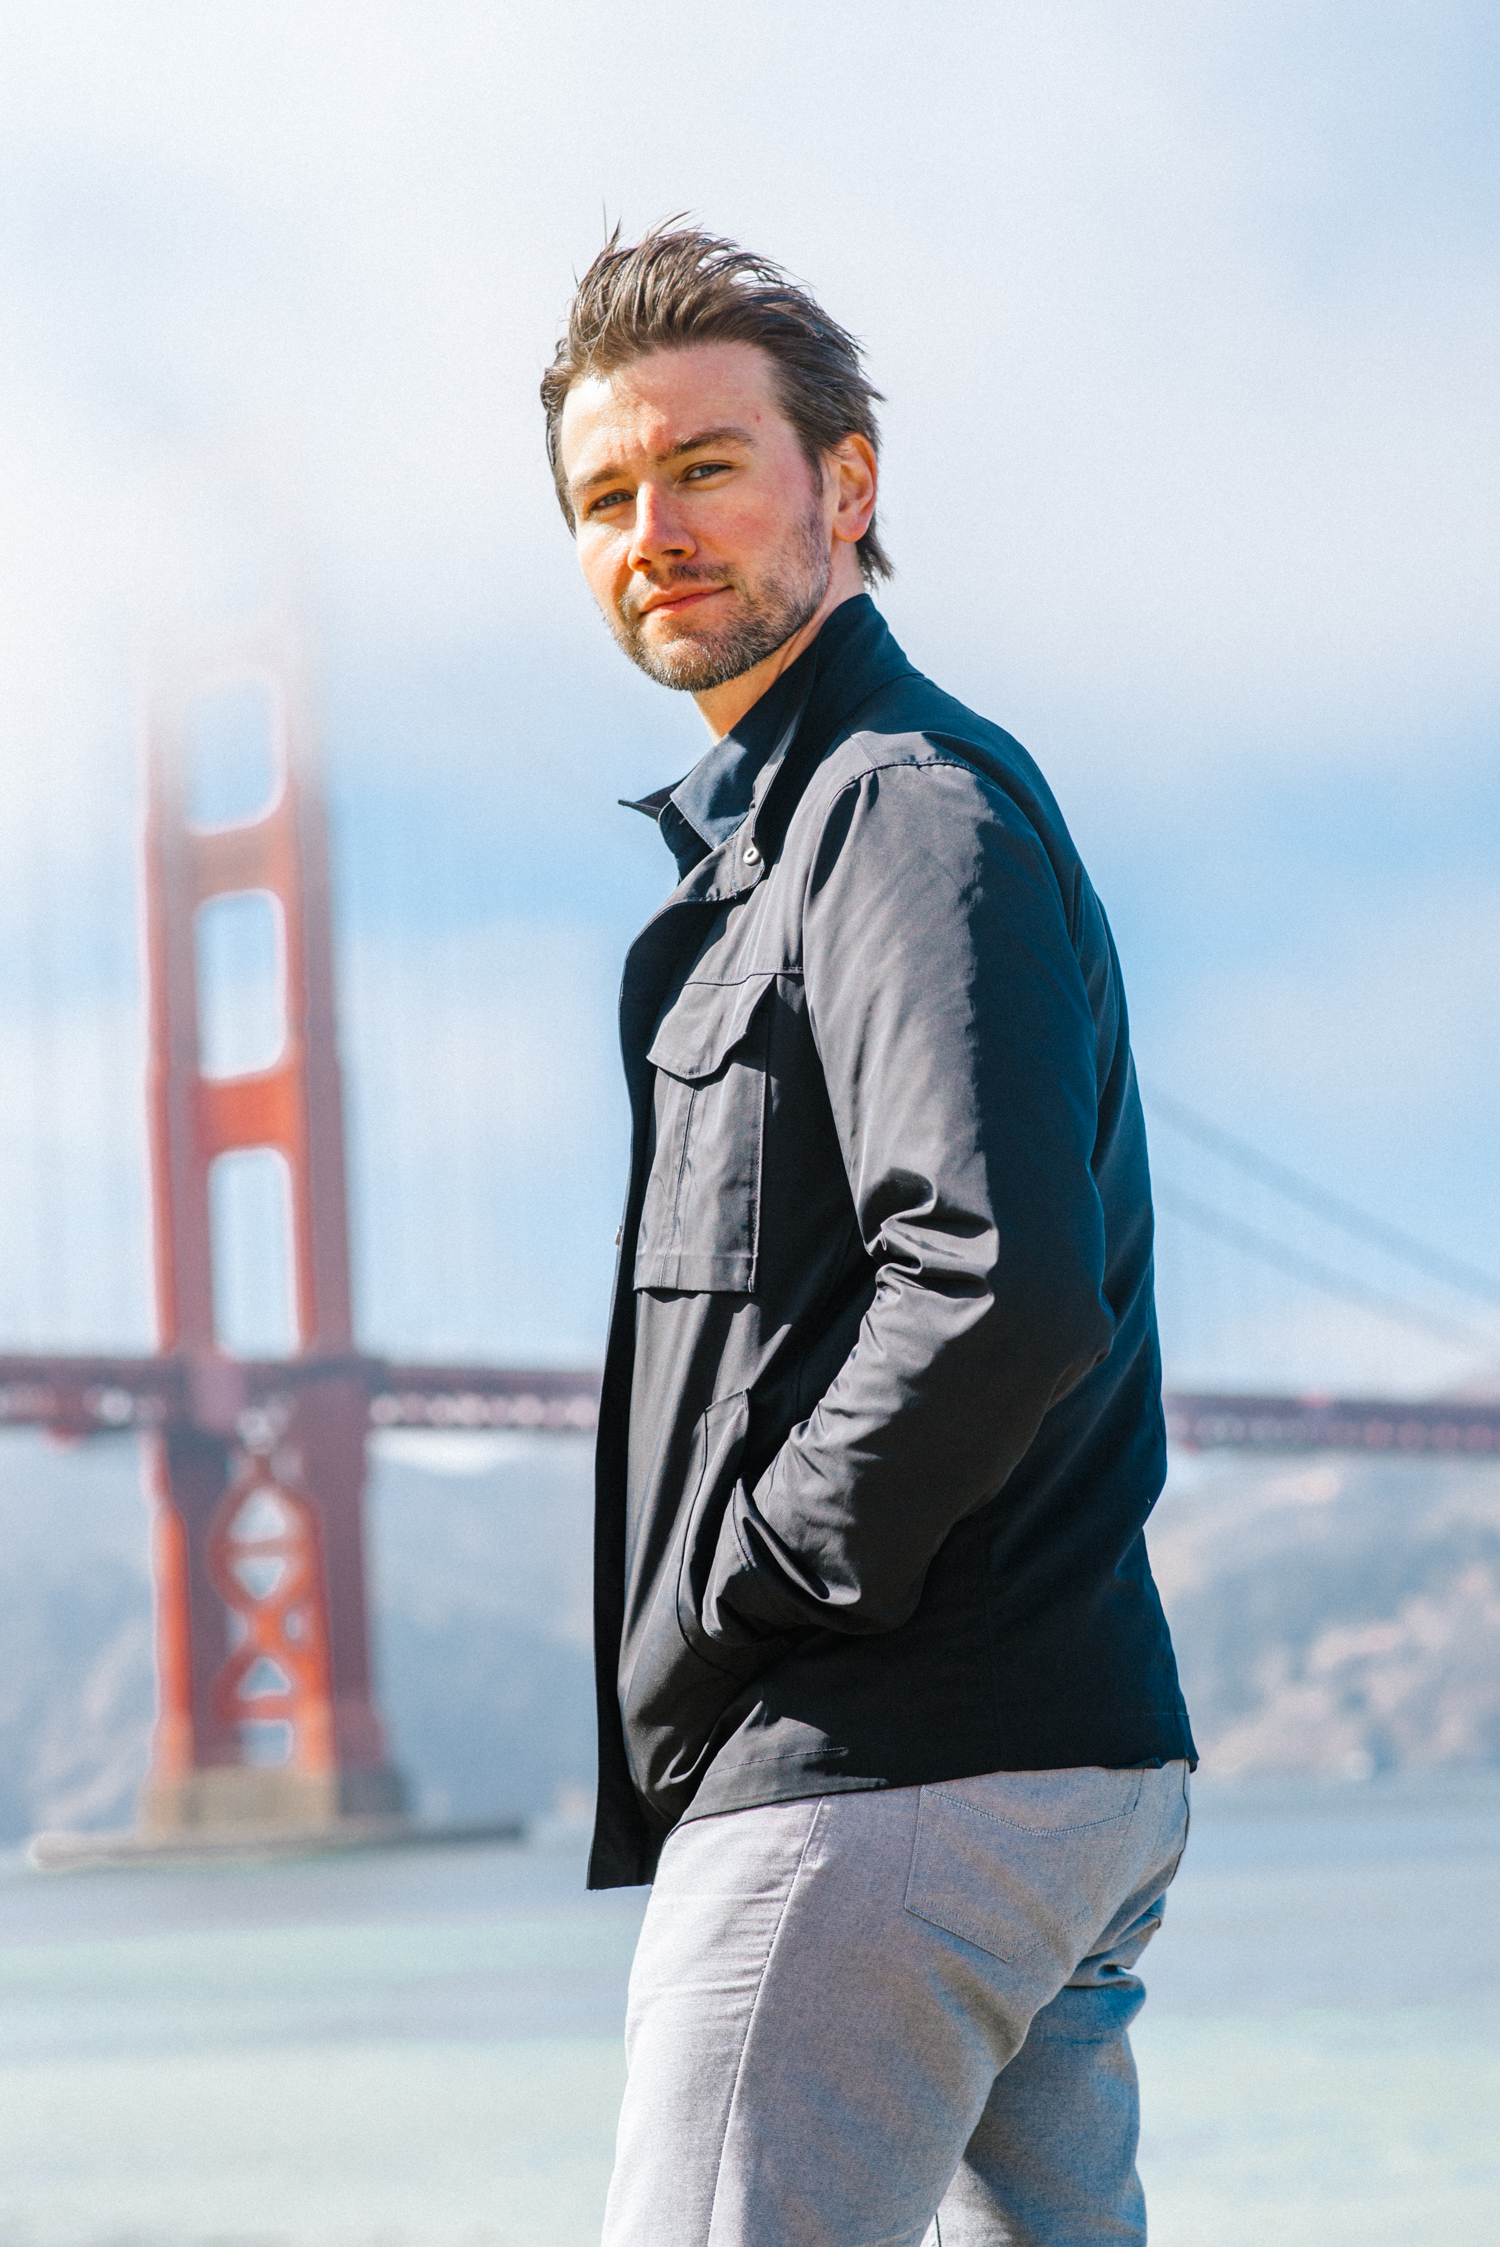 Torrance Coombs joins Alyssa Campanella of The A List in San Francisco